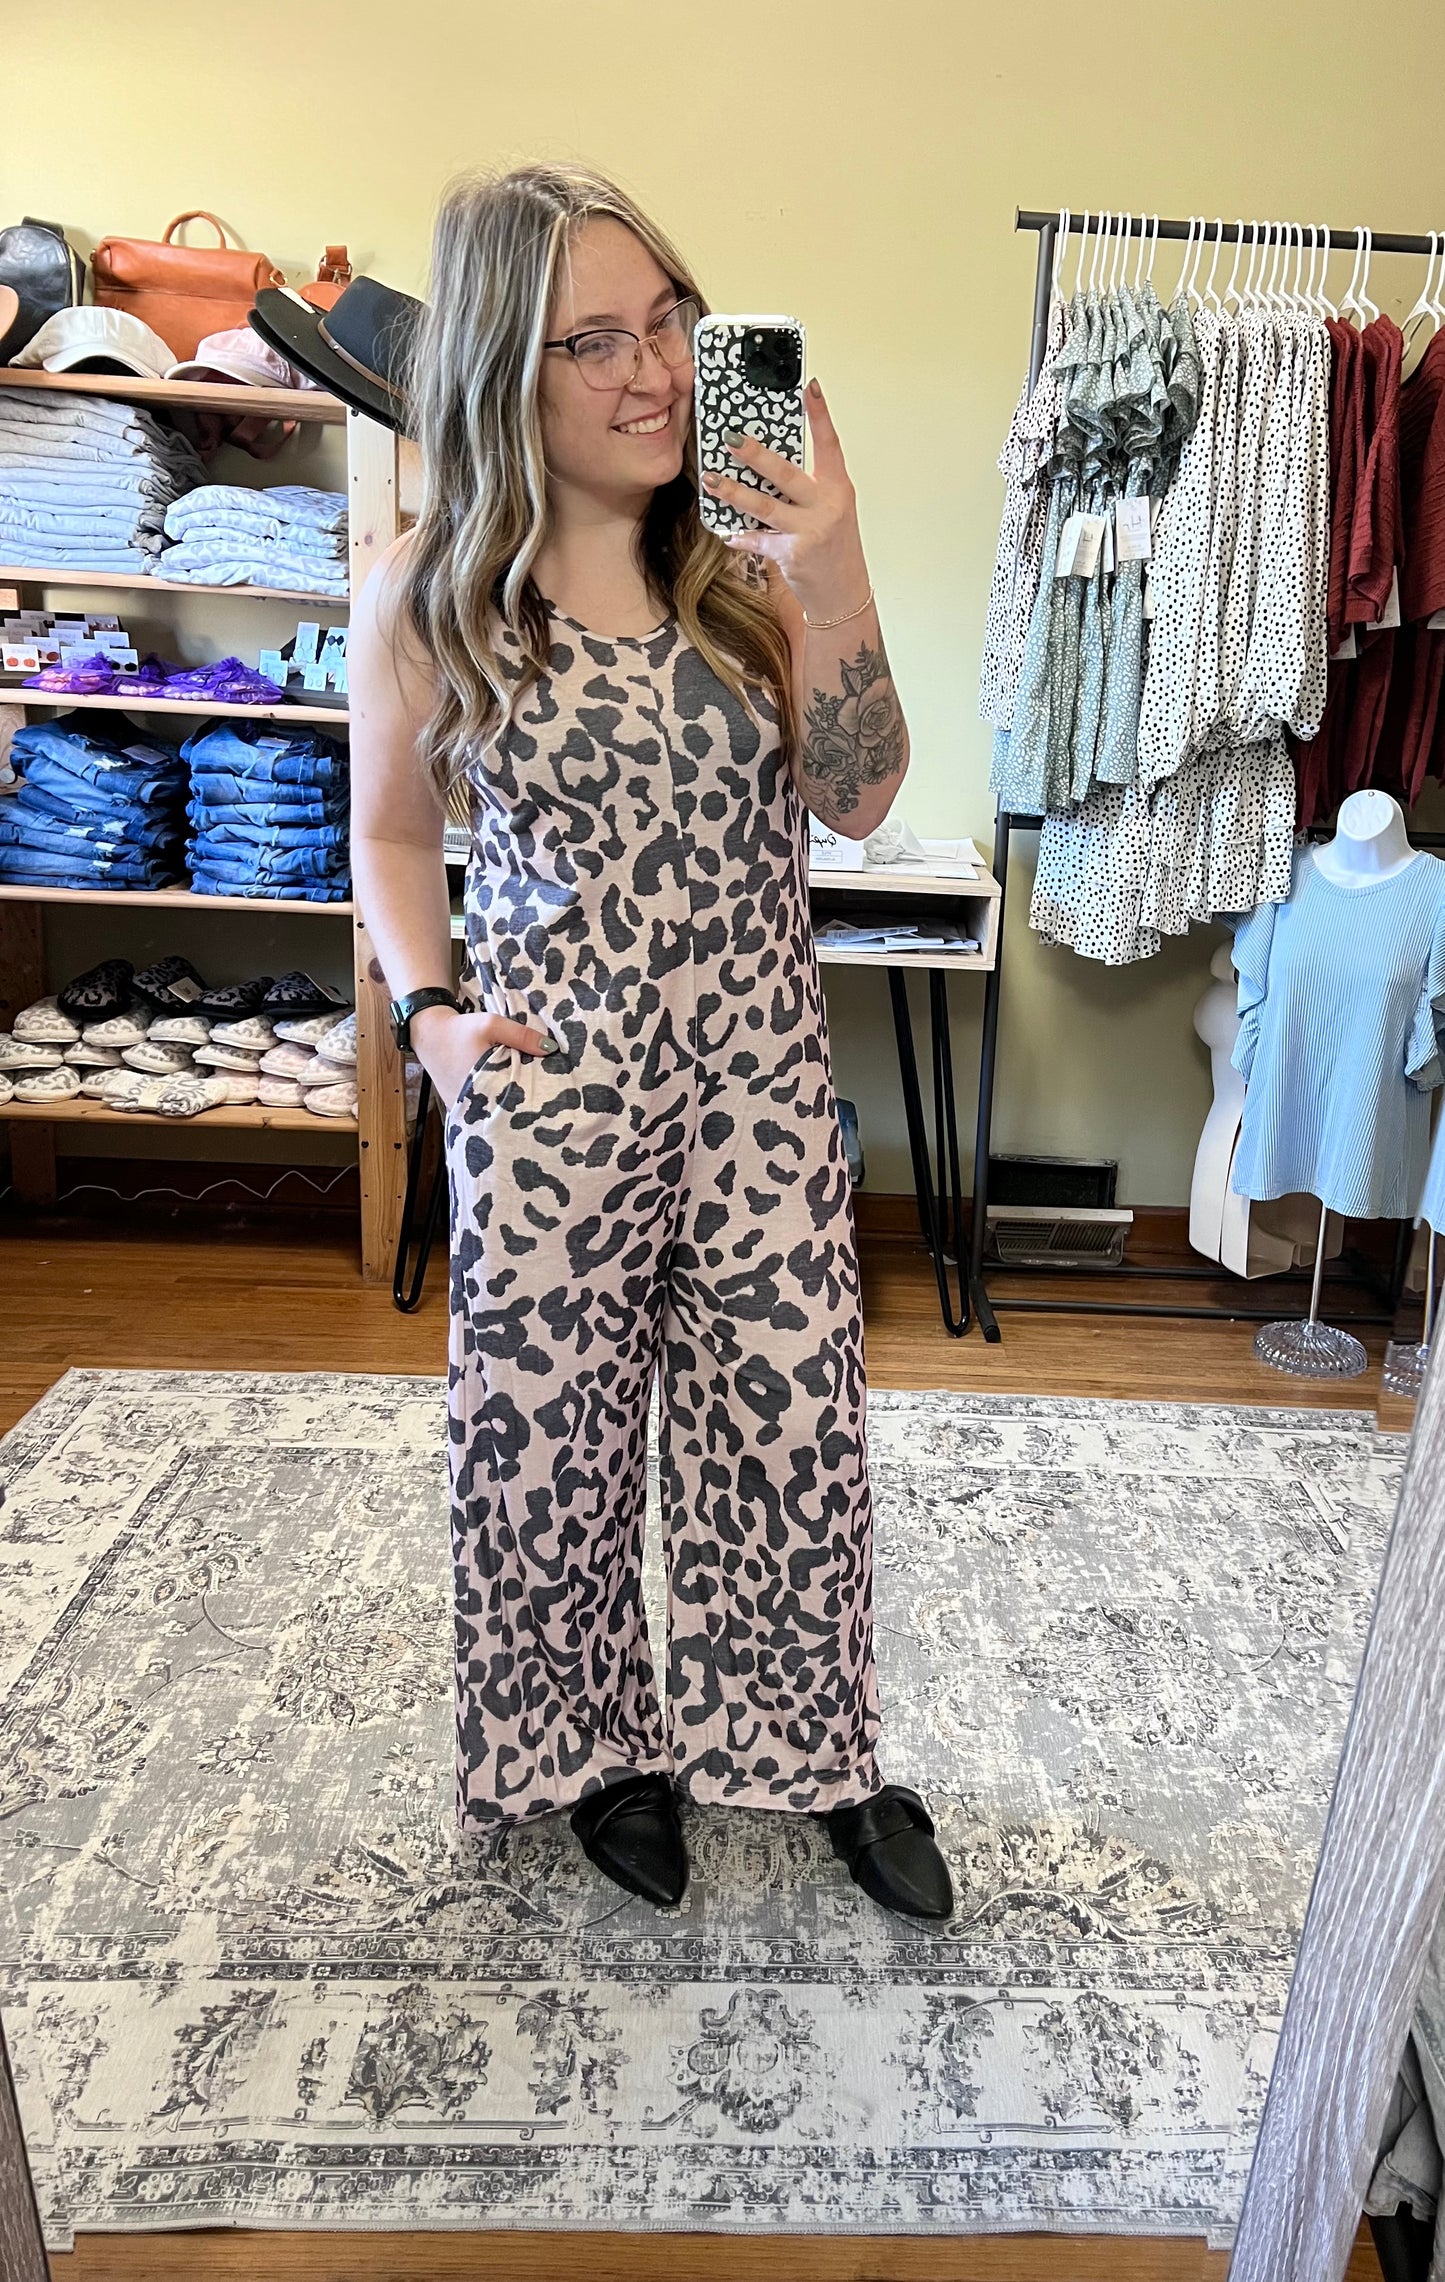 Leopard Jumpsuit with Pockets